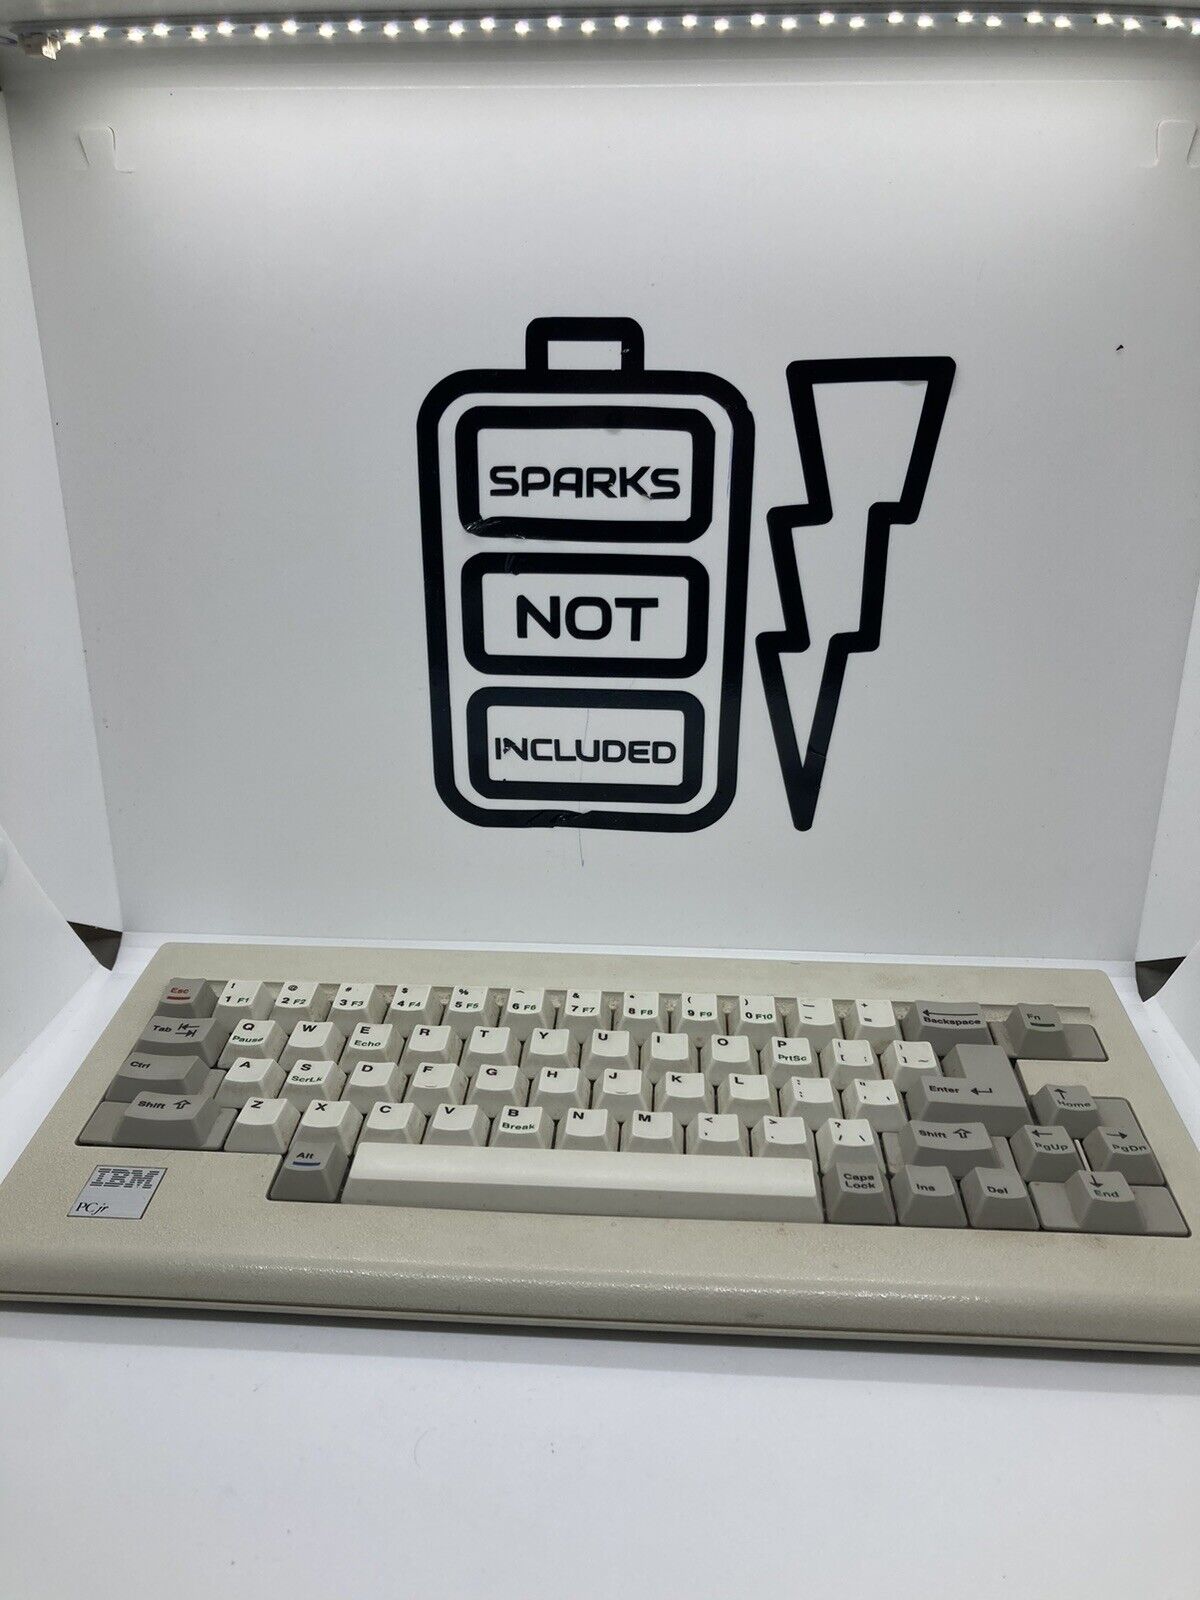 IBM PCjr Proprietary Wireless/Wired Keyboard (WITH BOX & STYROFOAM, NO CABLE)